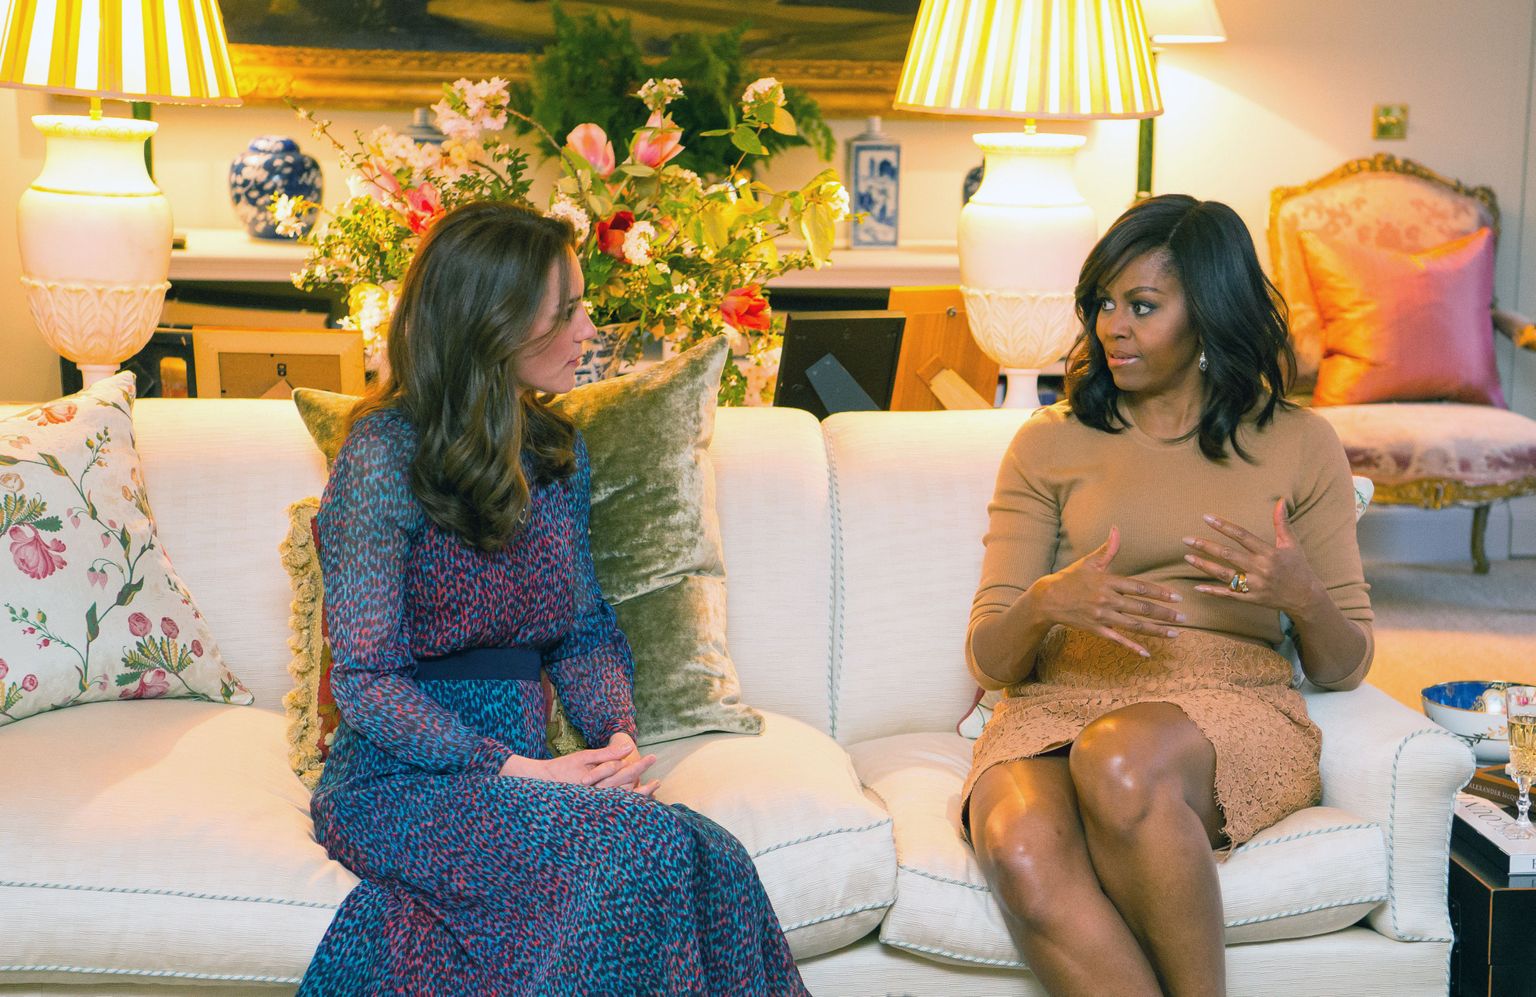 Britian's Kate Duchess of Cambridge talks with US first lady Michelle Obama, right, in the Drawing Room of Kensington Palace, London, prior to a private dinner hosted by Prince William and Kate, Friday April 22, 2016.  US President Barack Obama and Michelle plunged into a whirlwind visit to England with royal socializing and political talks. (Dominic Lipinski/Pool via AP)